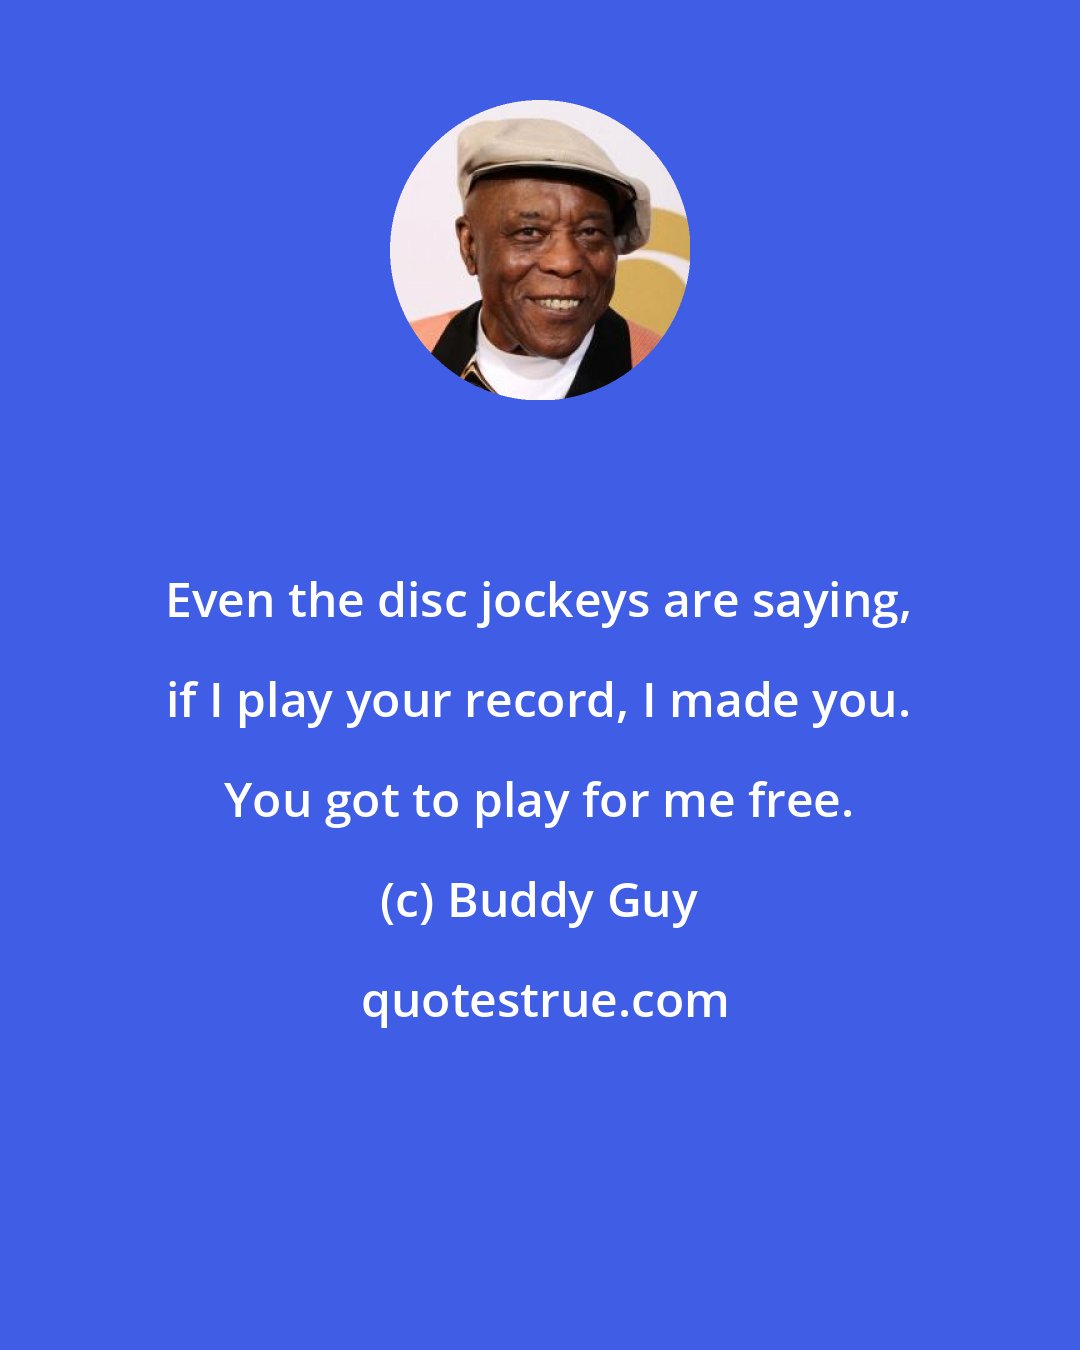 Buddy Guy: Even the disc jockeys are saying, if I play your record, I made you. You got to play for me free.